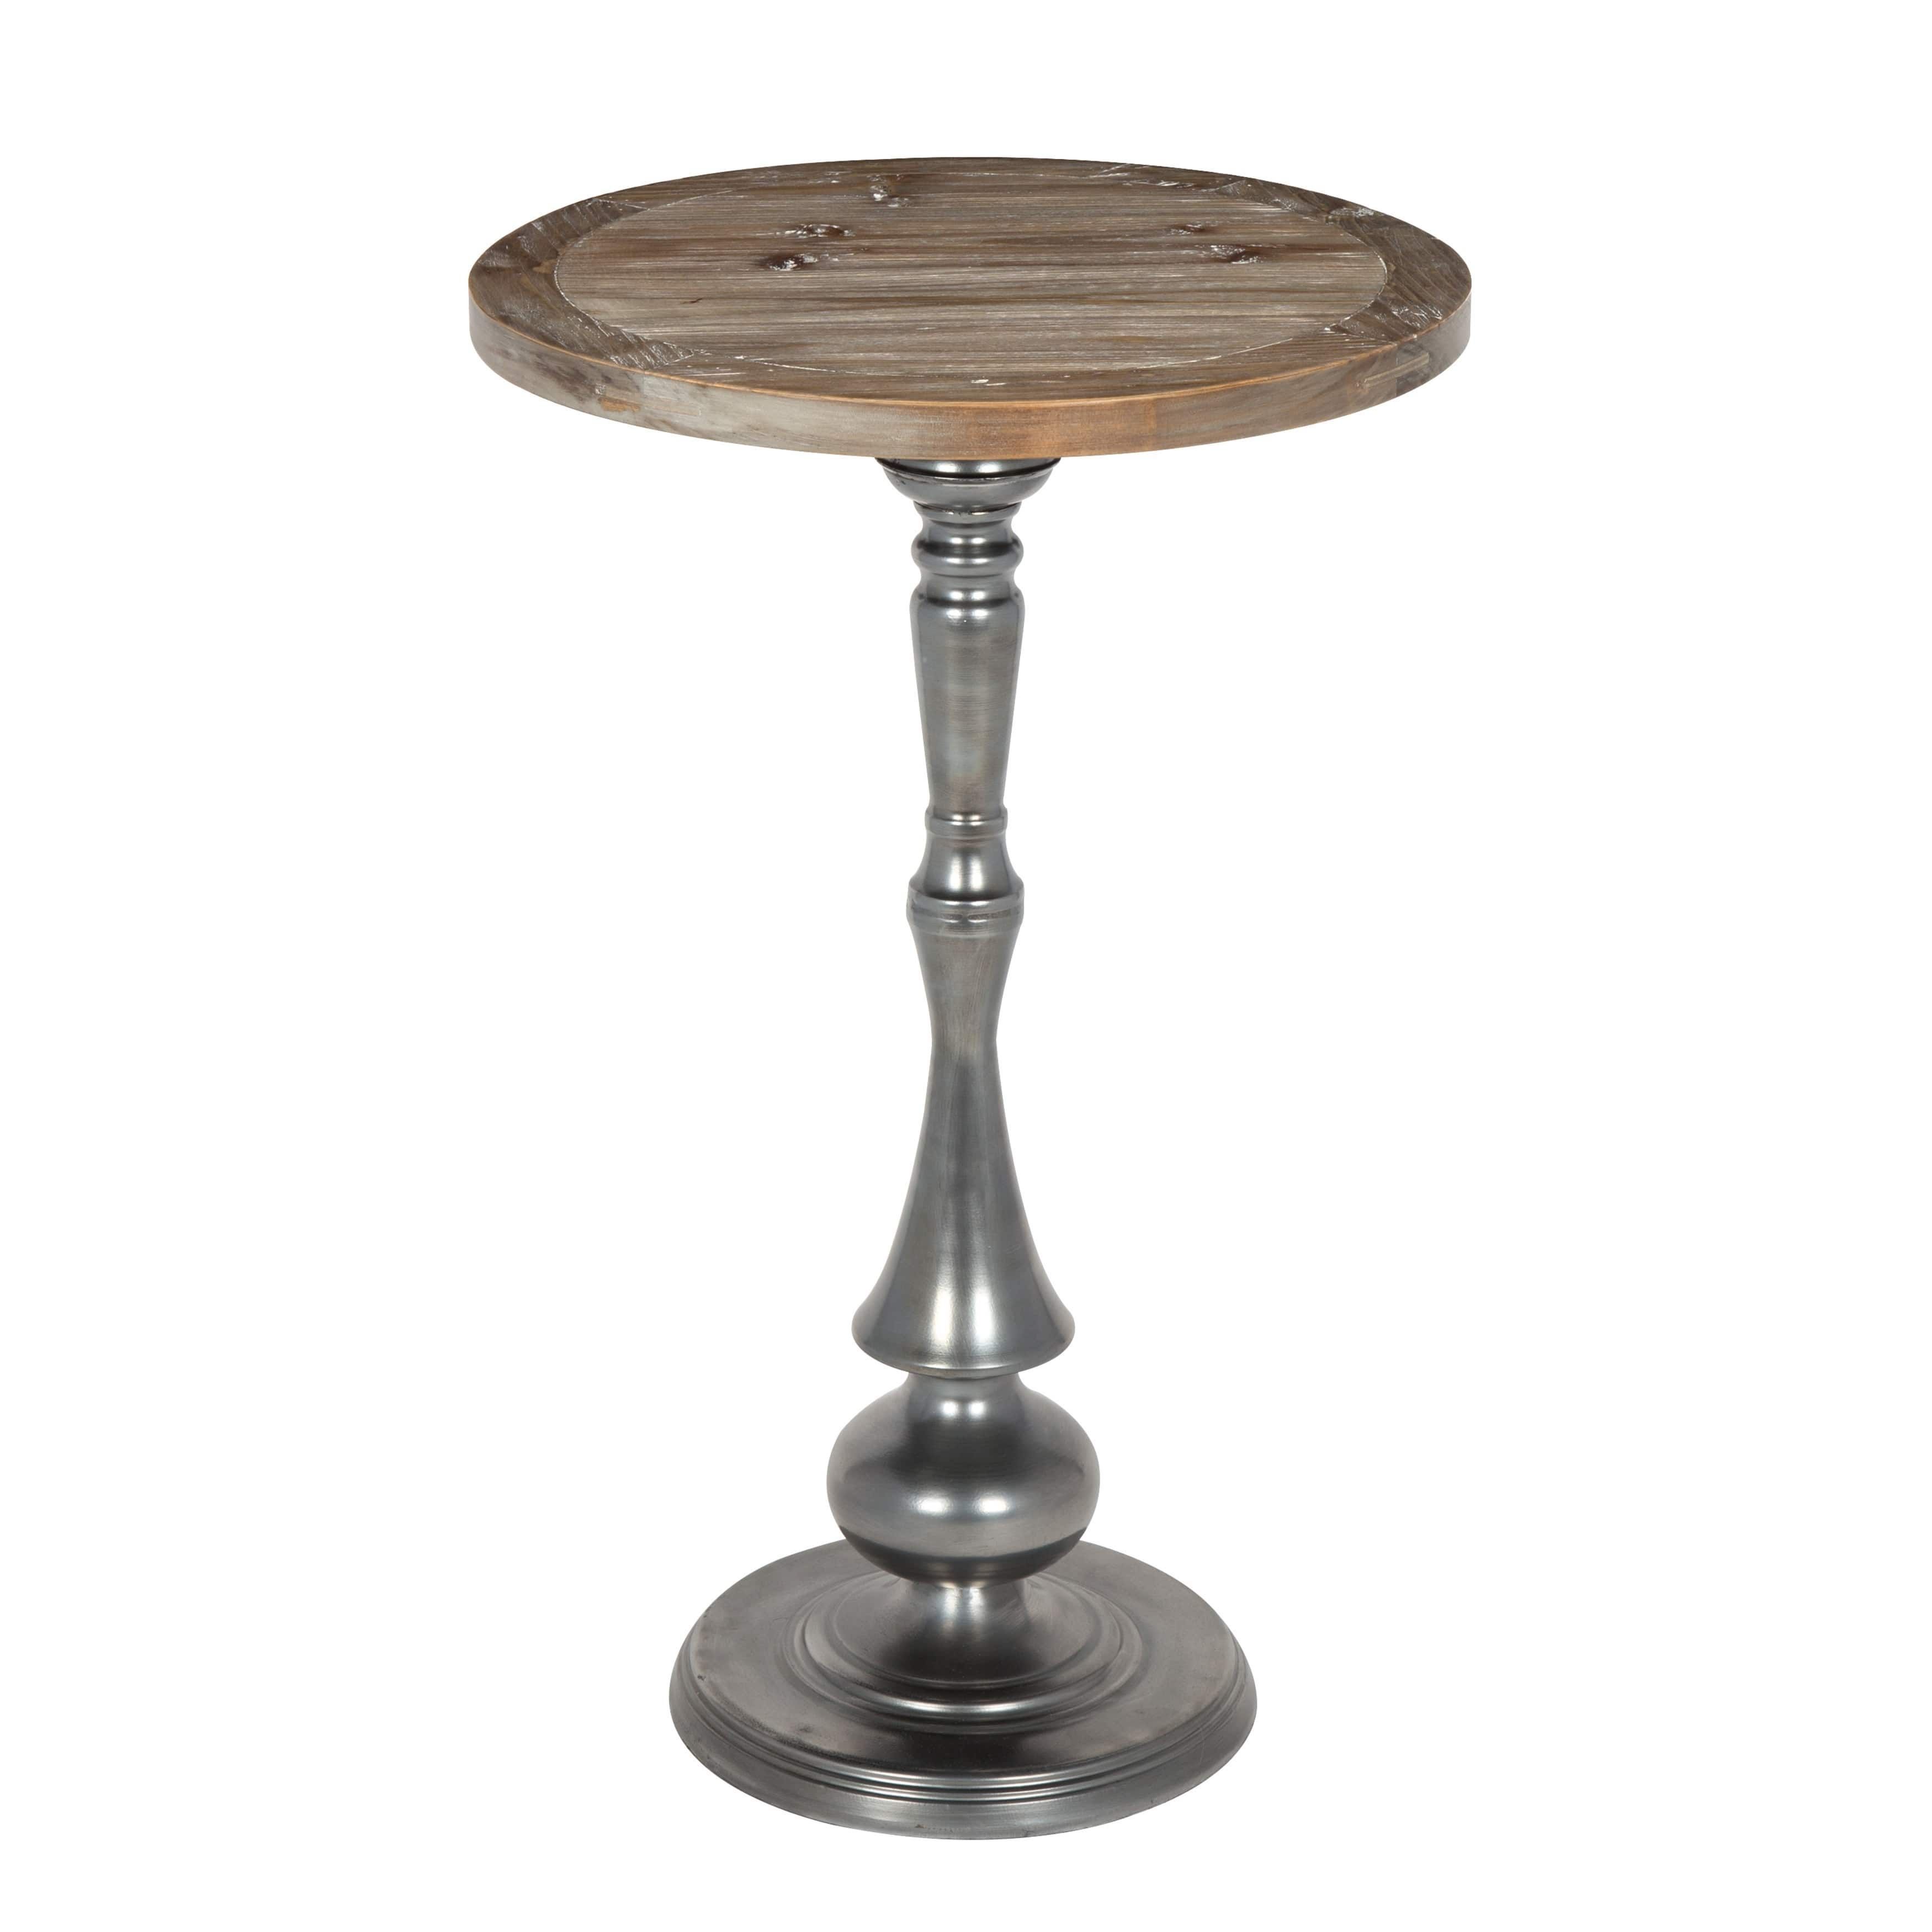 kate and laurel regina round metal wood pedestal accent table silver brown wicker coffee lucite acrylic ikea chest drawers unique desk lamps top legs modern outdoor nic small